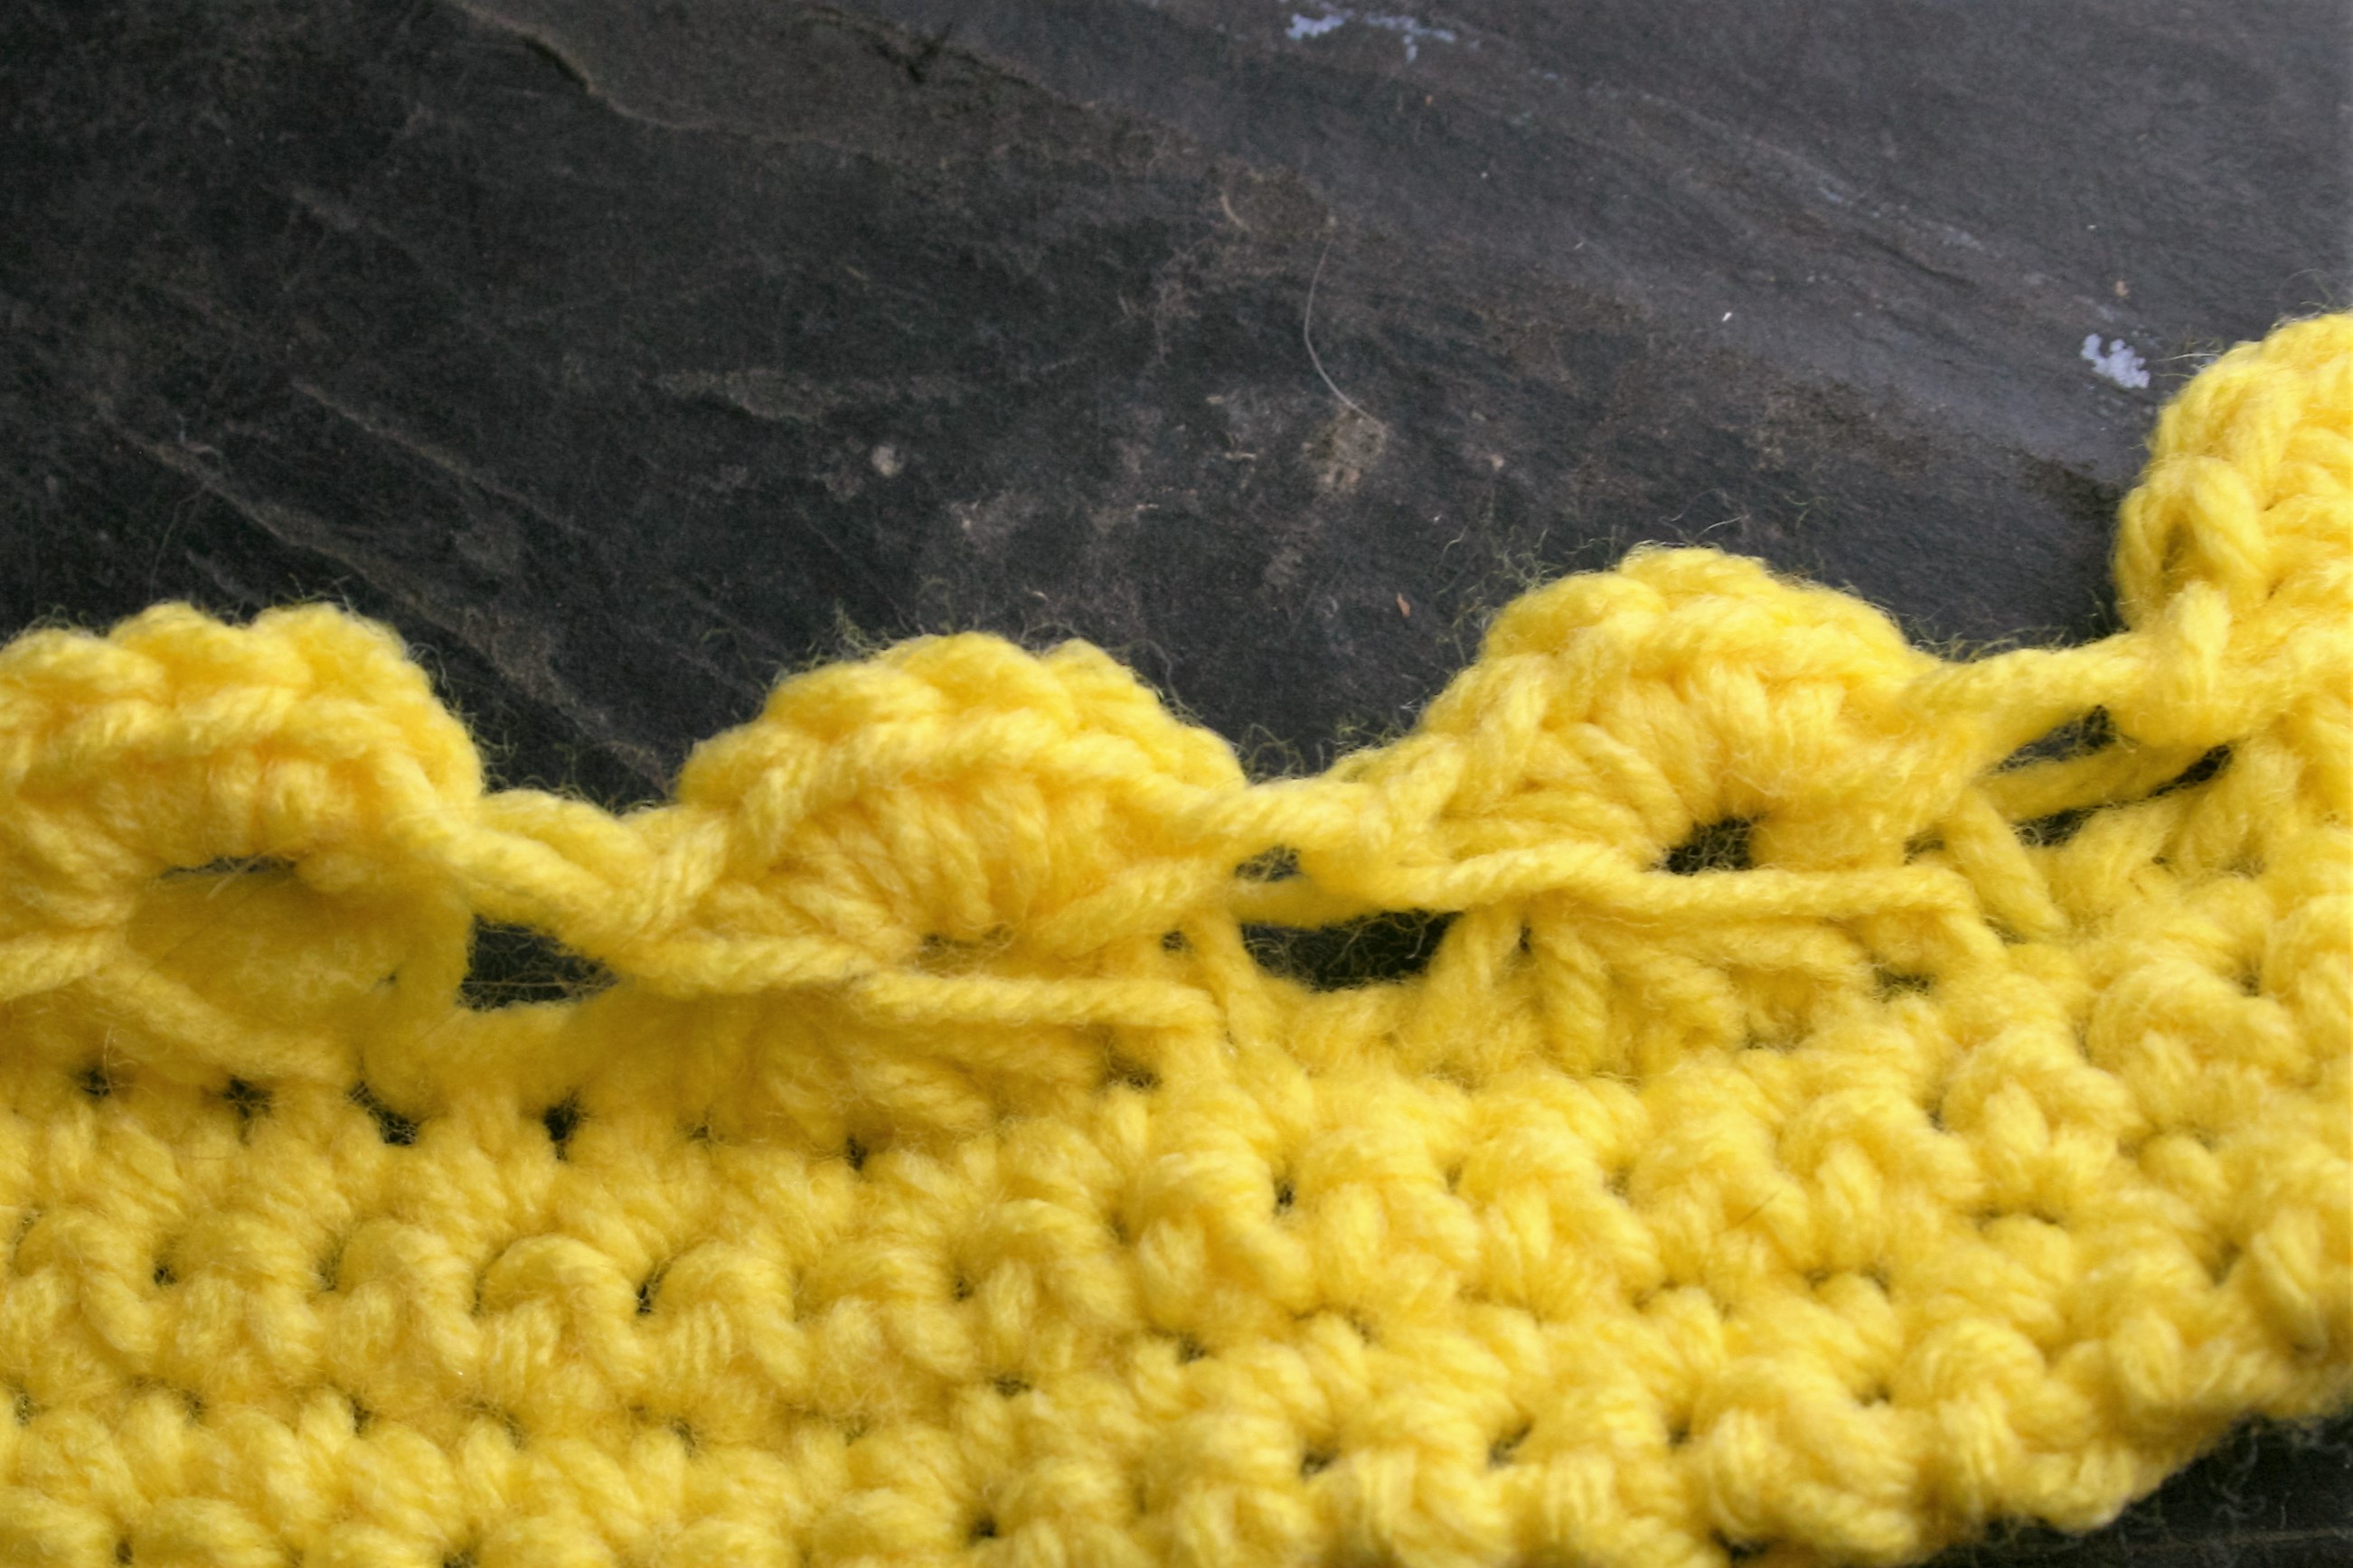 How to Crochet Broomstick Lace with Crochet Tips to Make it Easy 